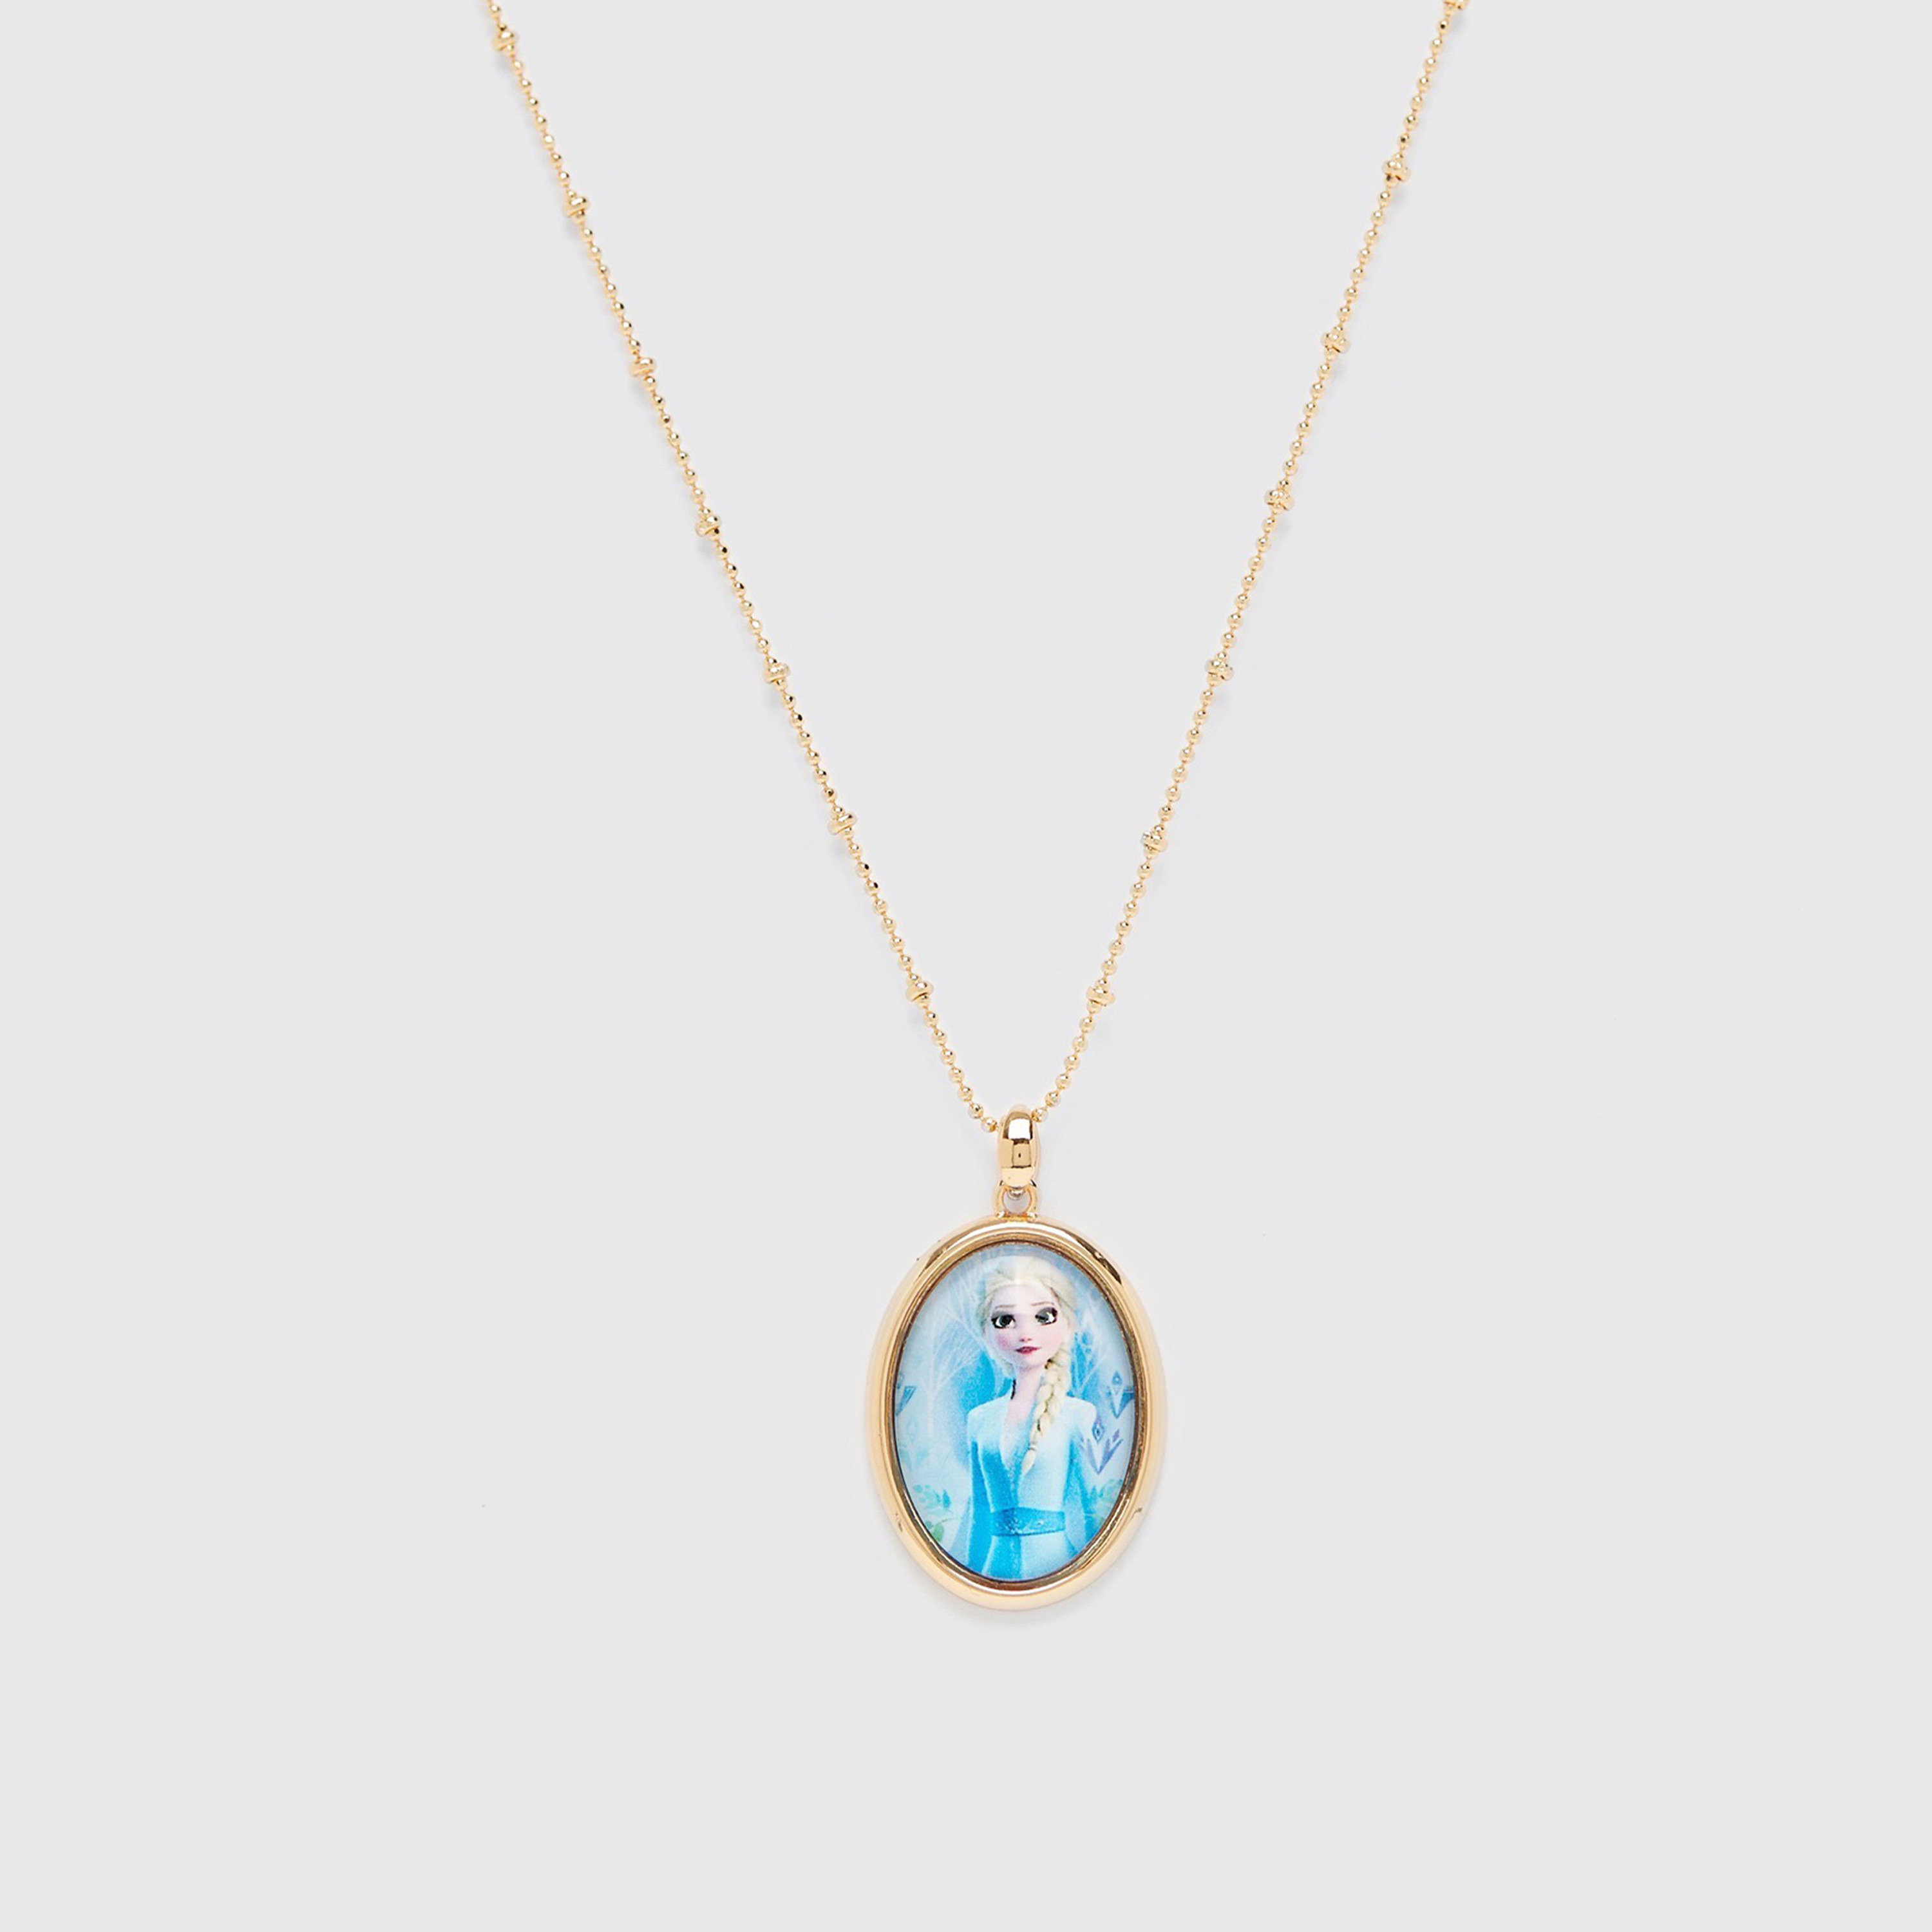 CLUE Frozen 2 - incredibly beautiful Spirit Necklace jewerly collection  from popular Korean brand - YouLoveIt.com